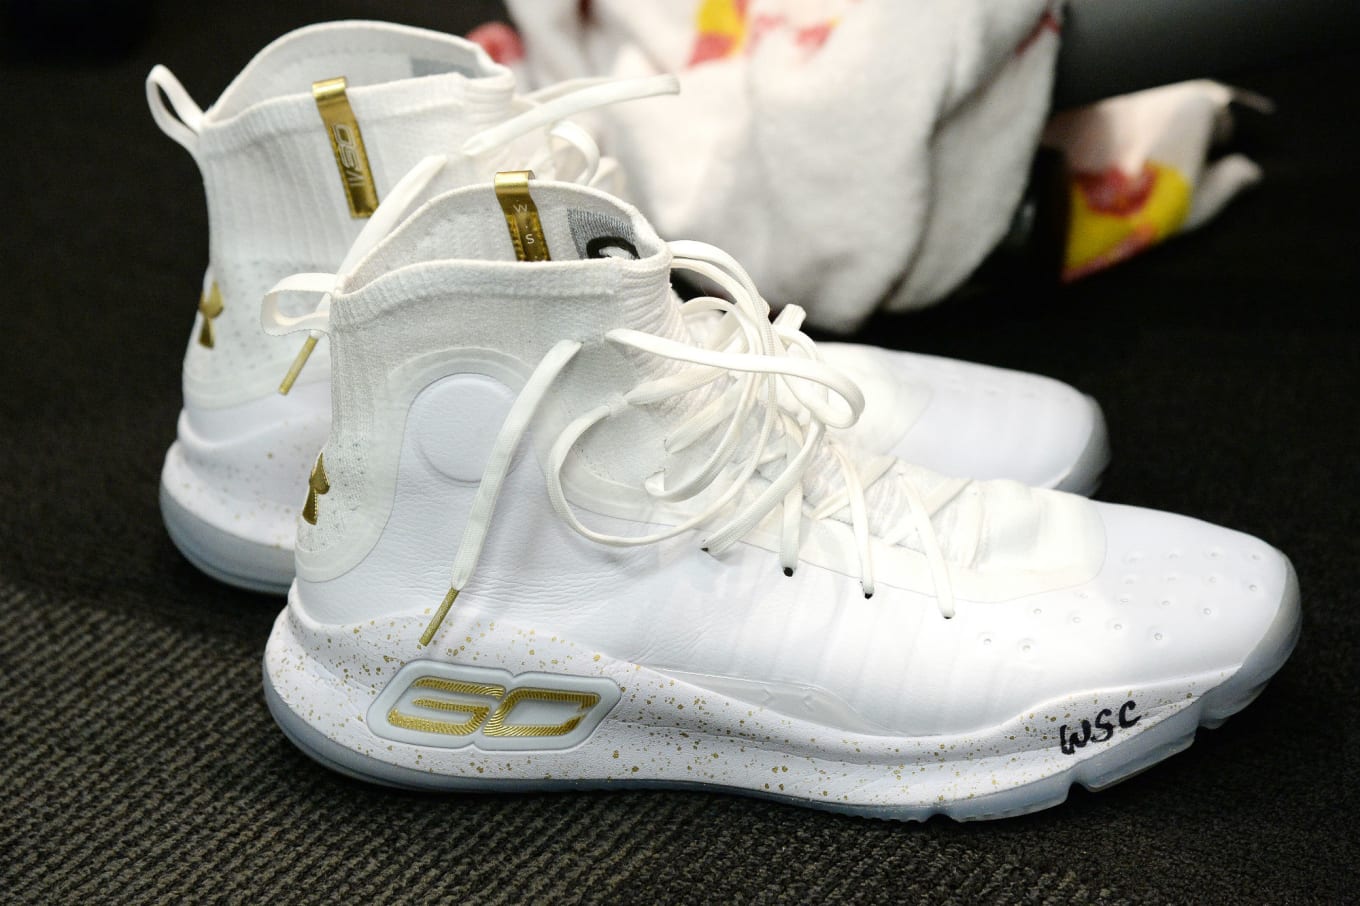 curry best shoes